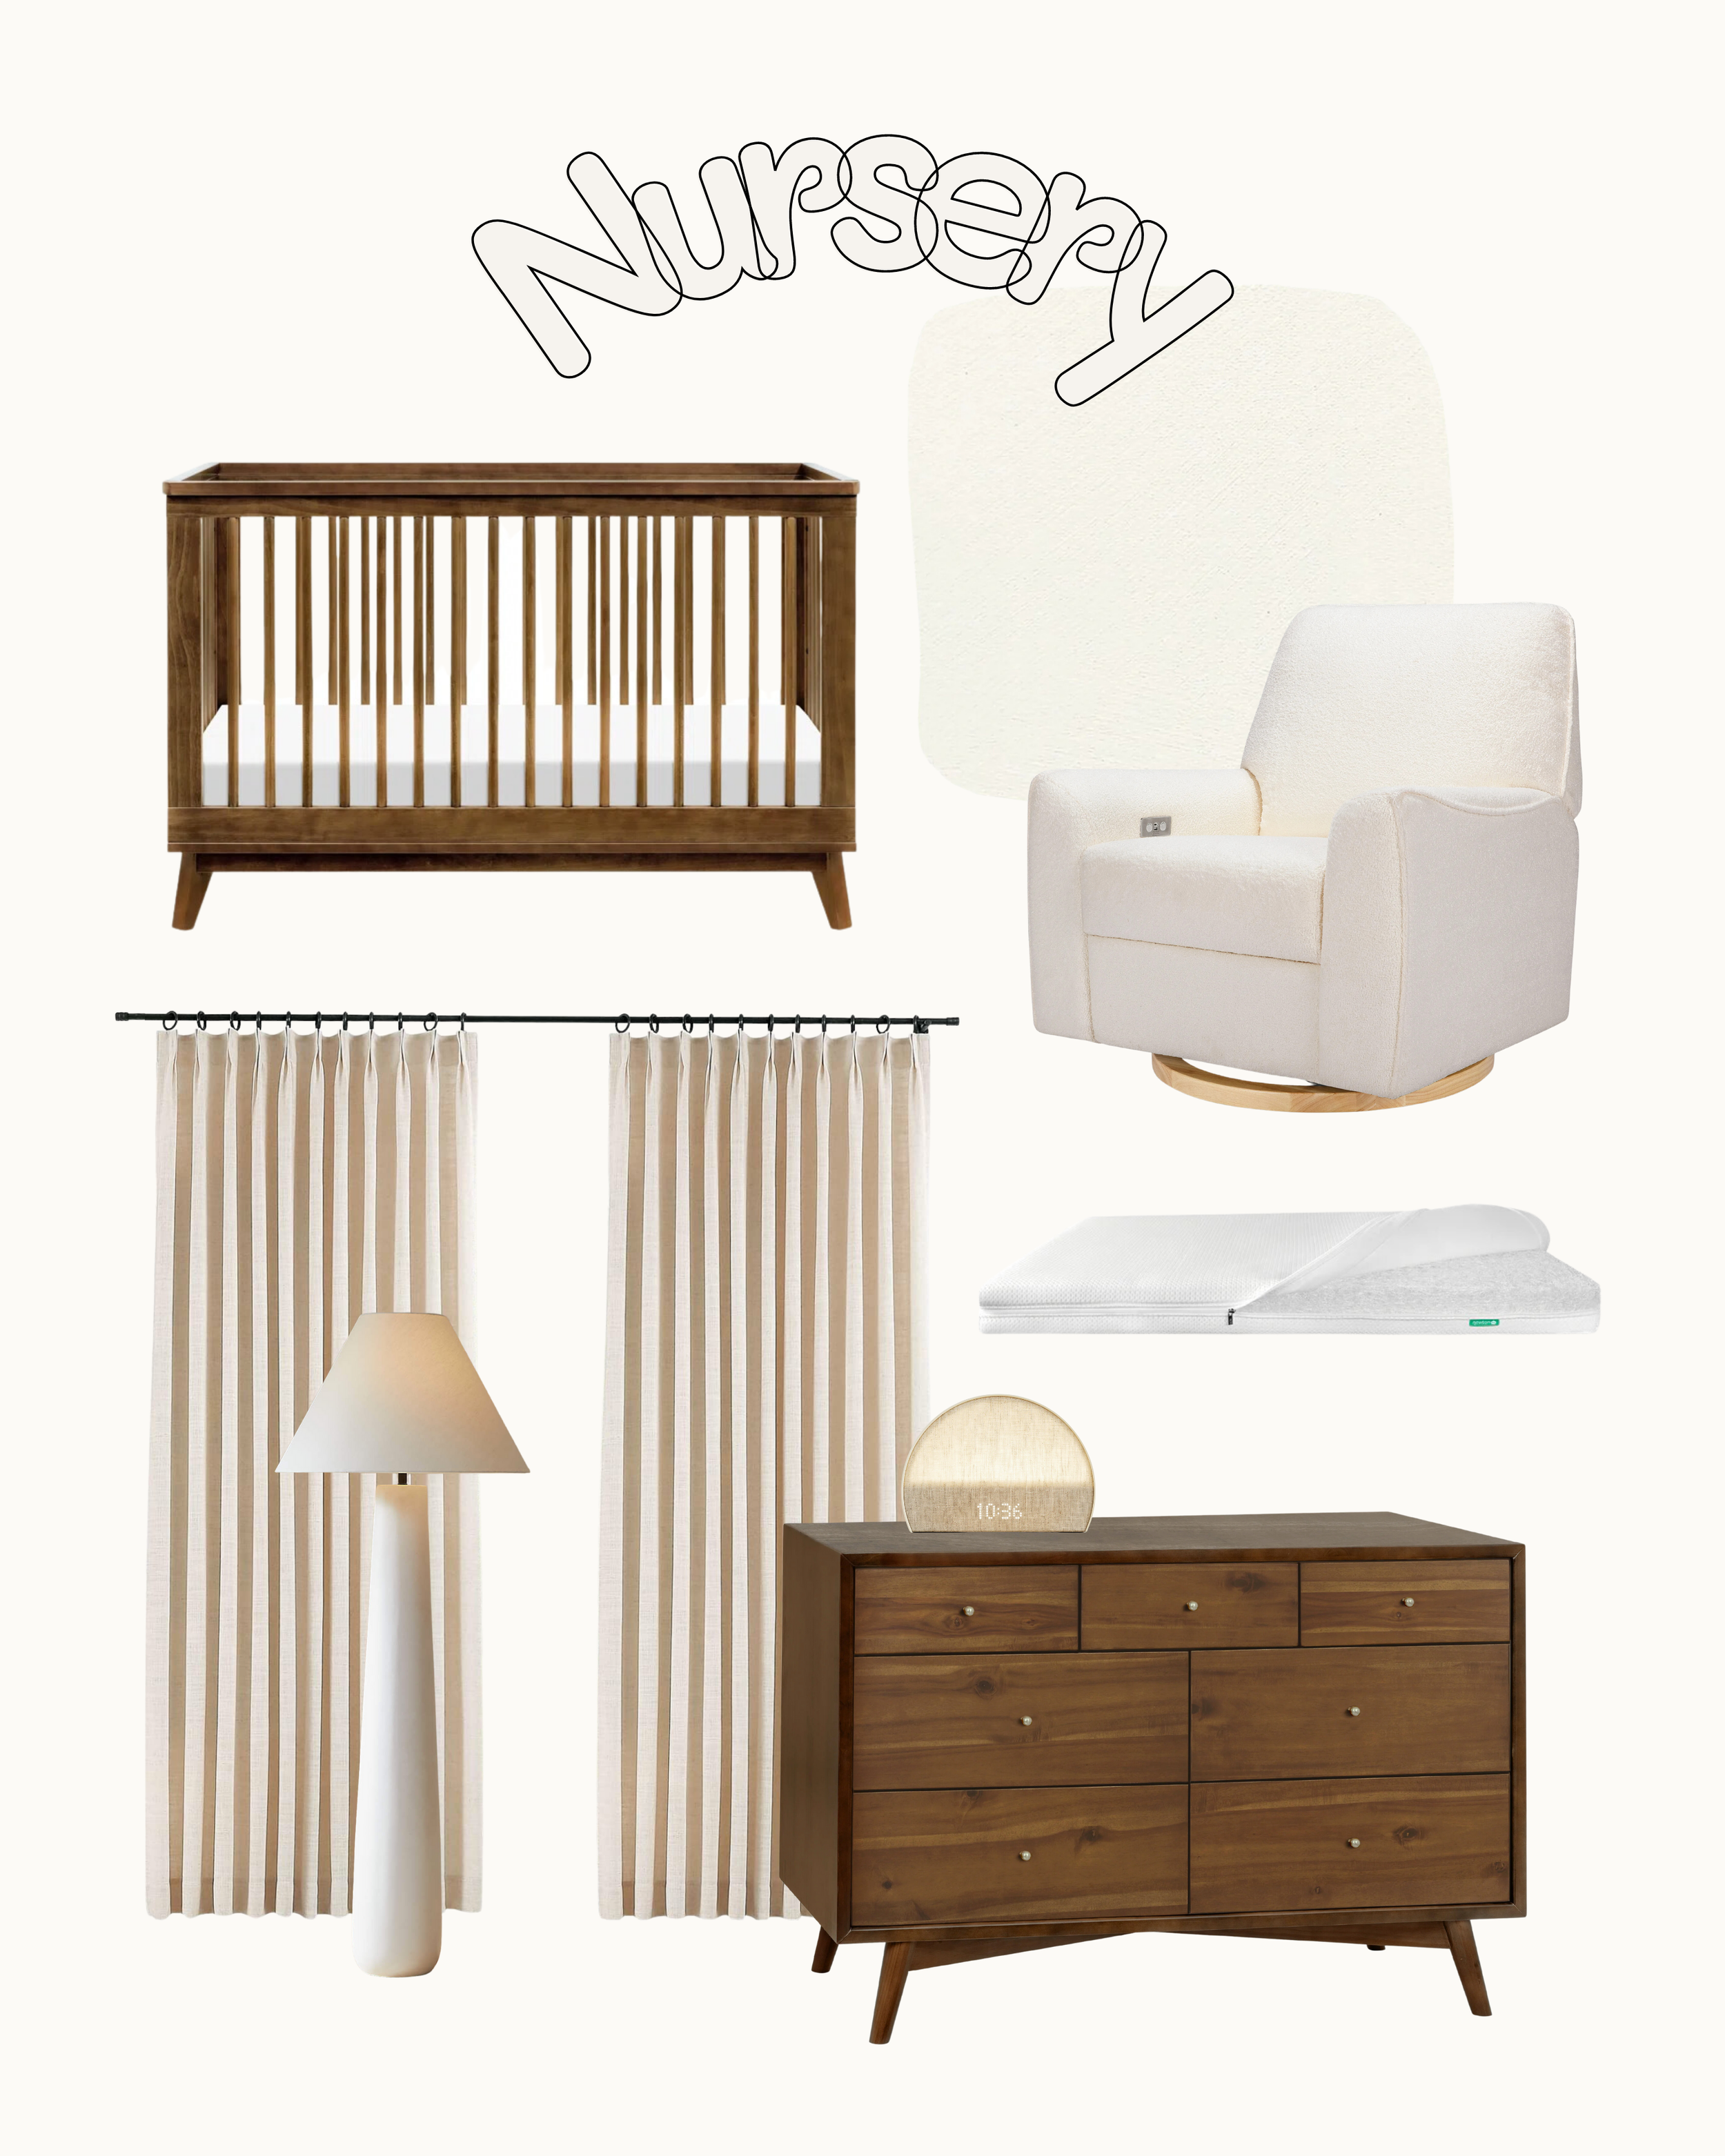 Our Nursery Inspo For Baby #2 - Neutral and Cozy Nursery - bresheppard.com.png